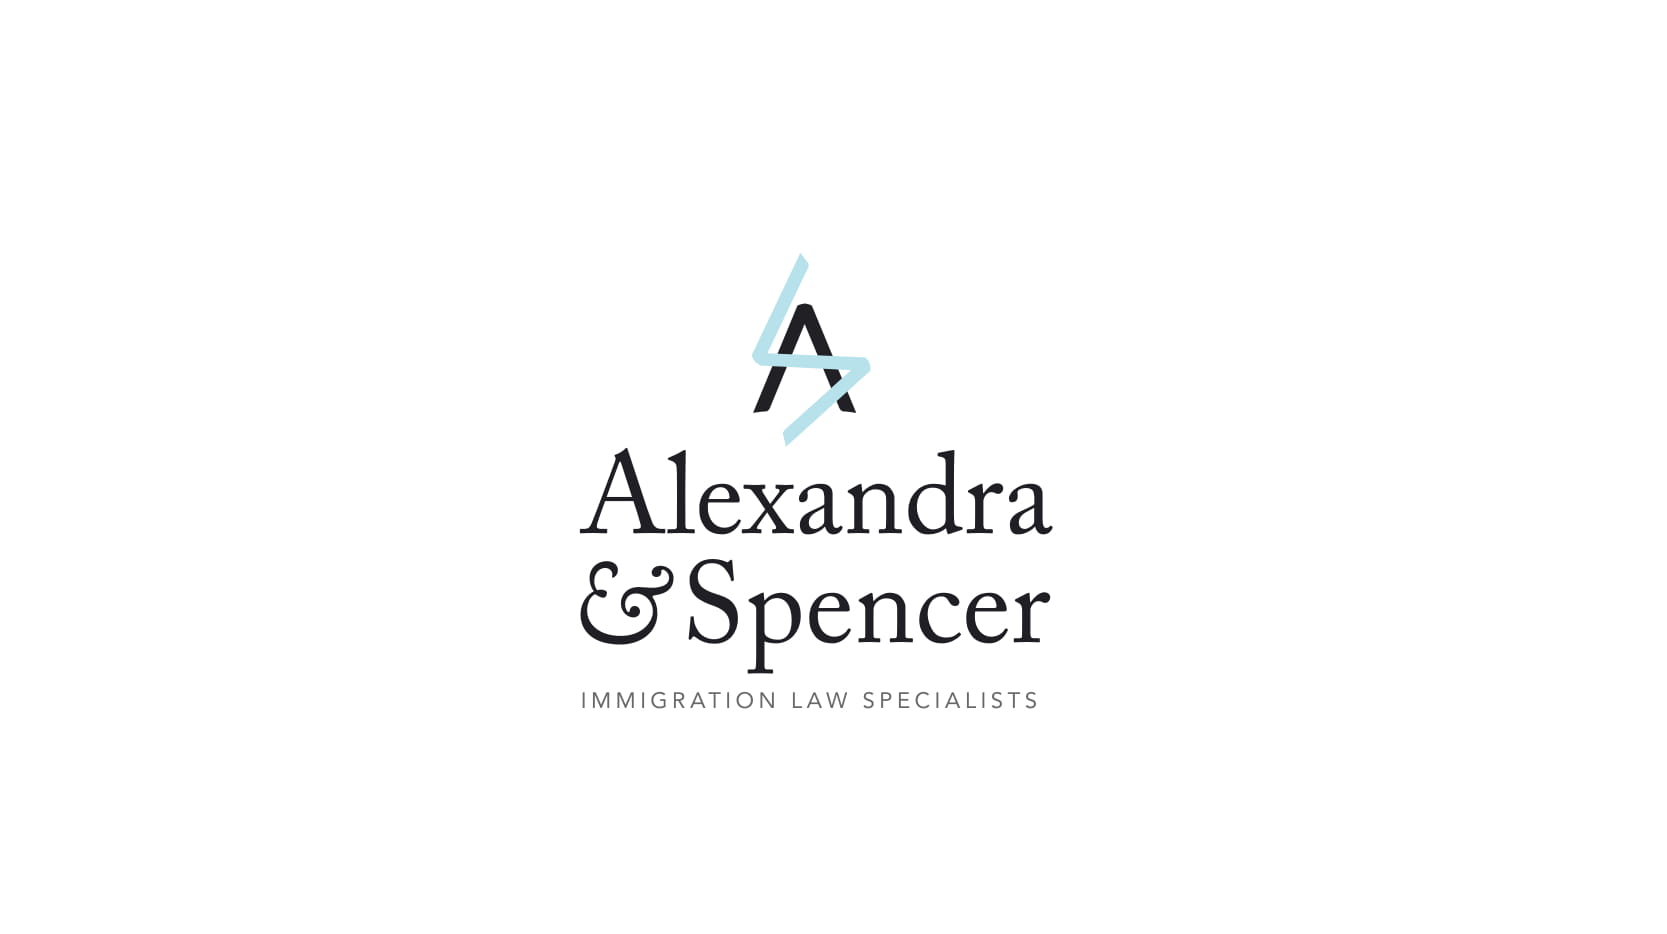 Logo of Alexandra & Spencer Immigration Advice And Services In Mayfair, London